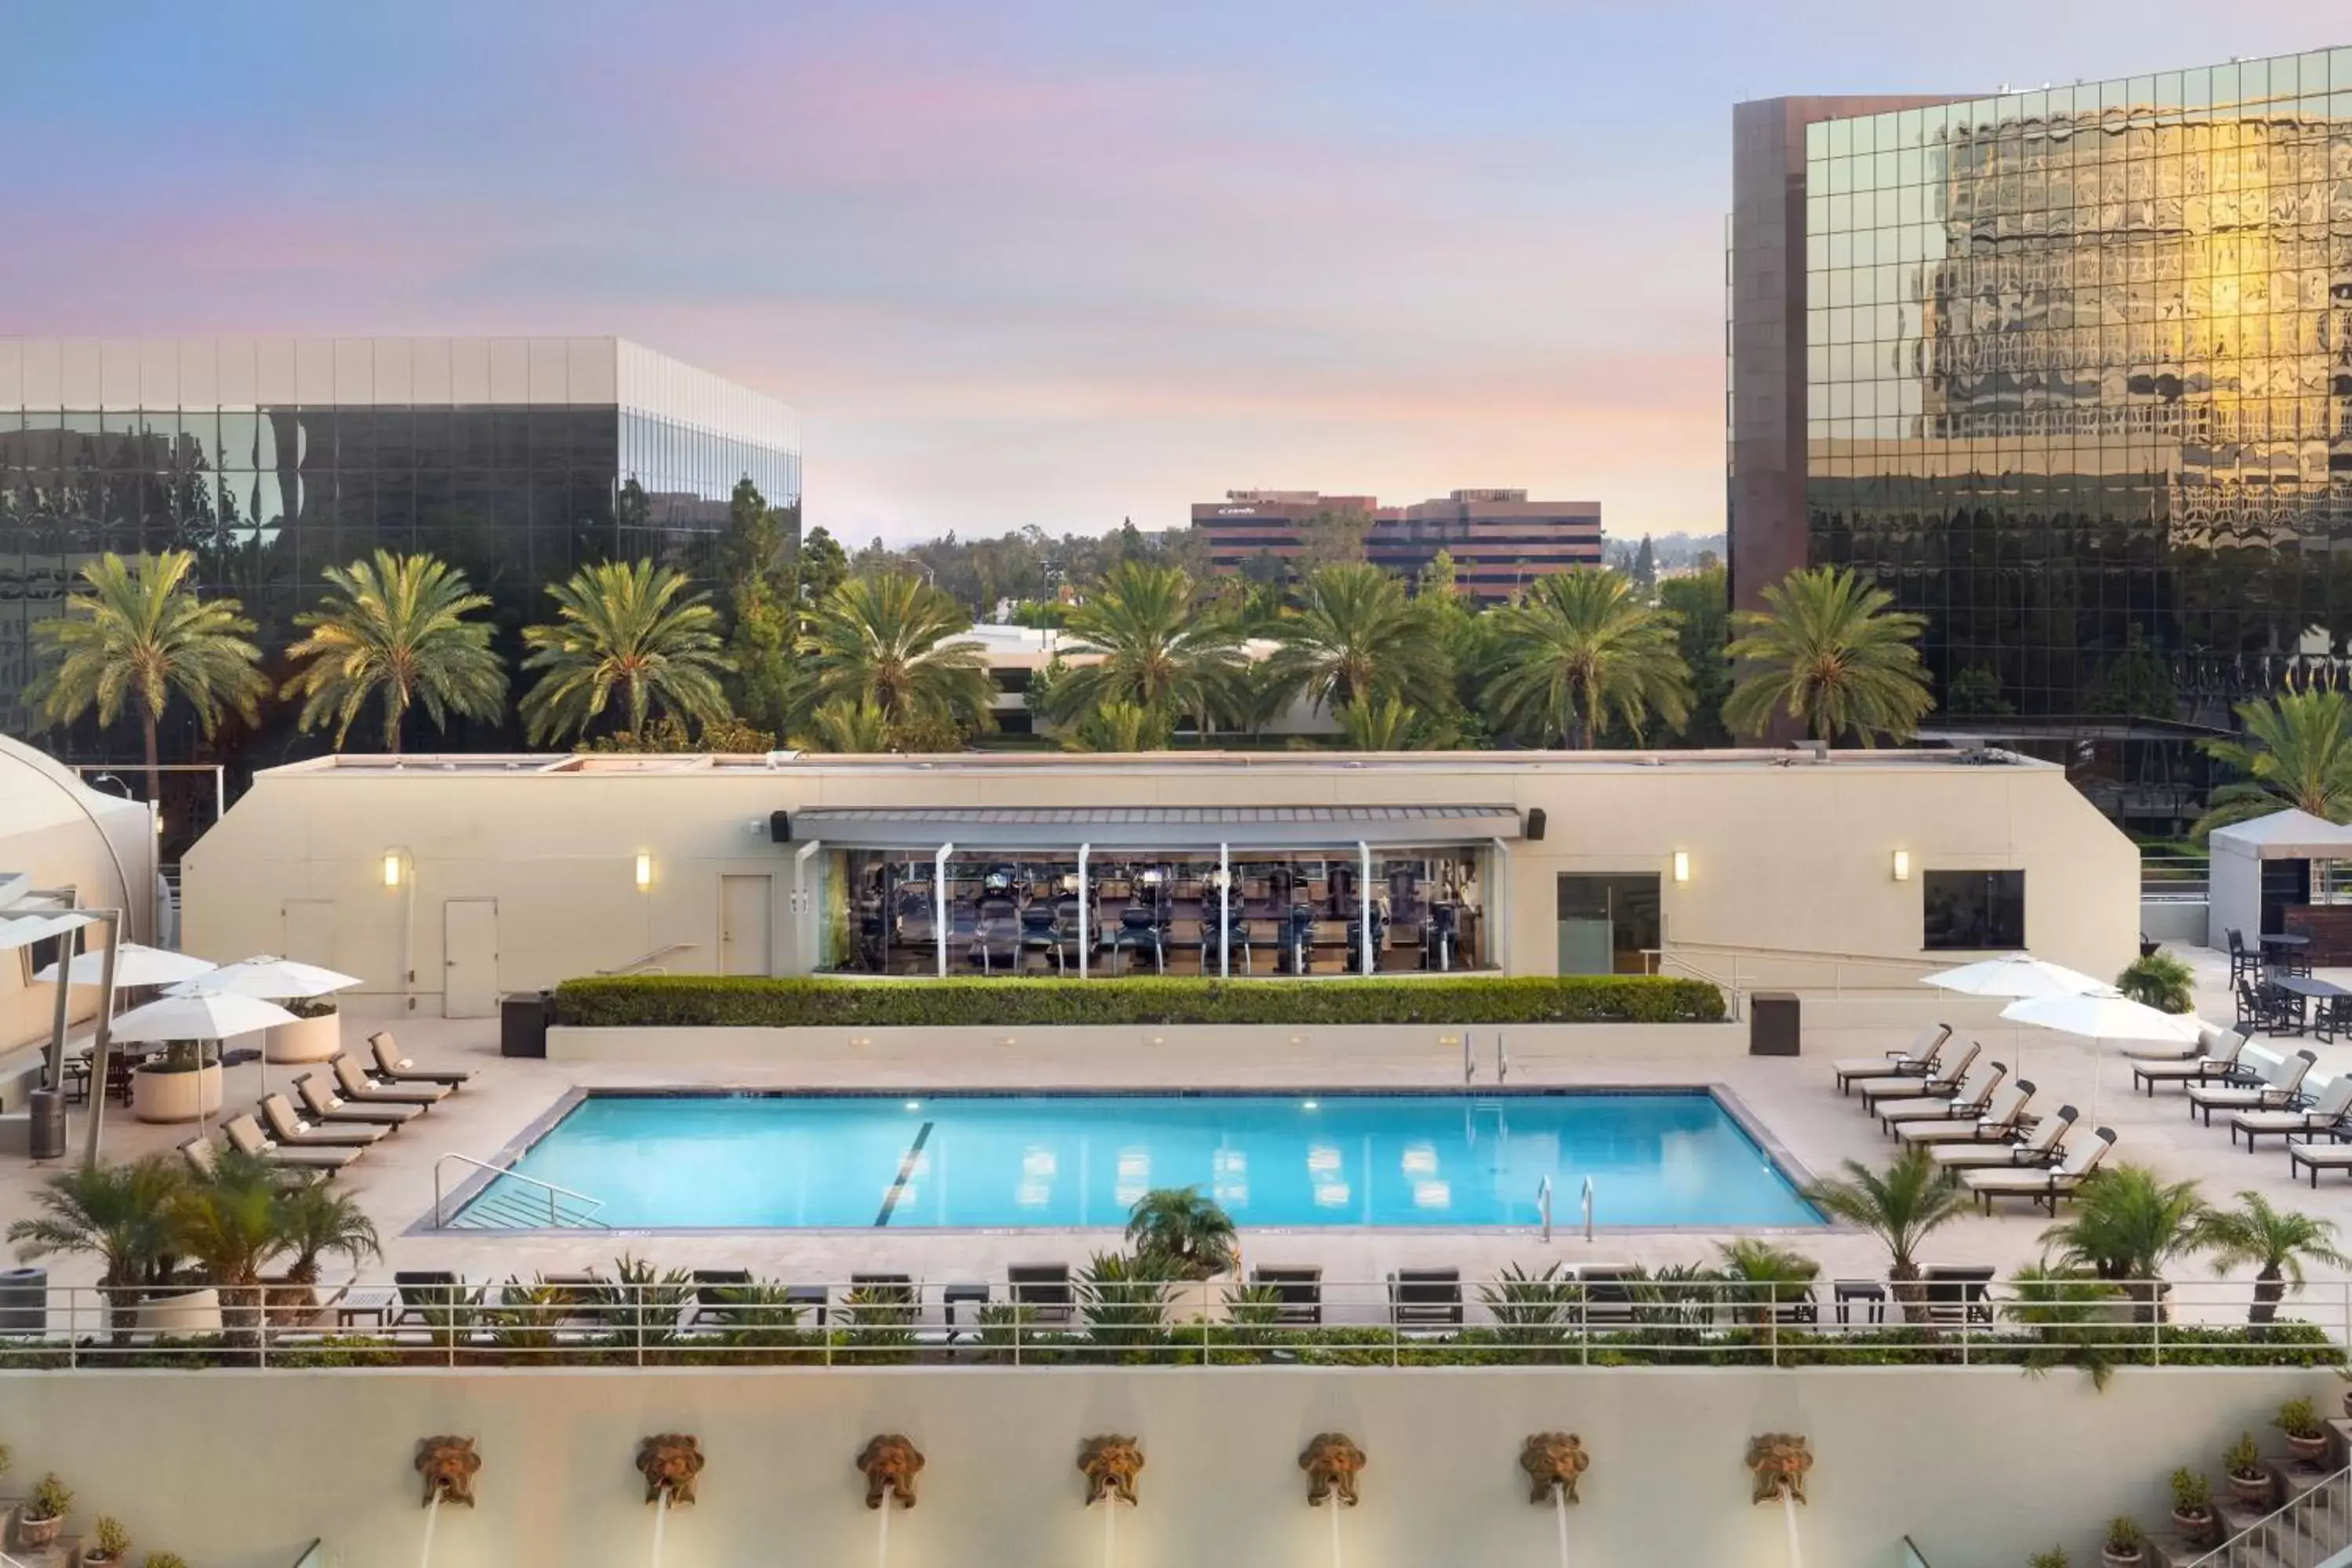 Property building, Pool View in The Westin South Coast Plaza, Costa Mesa